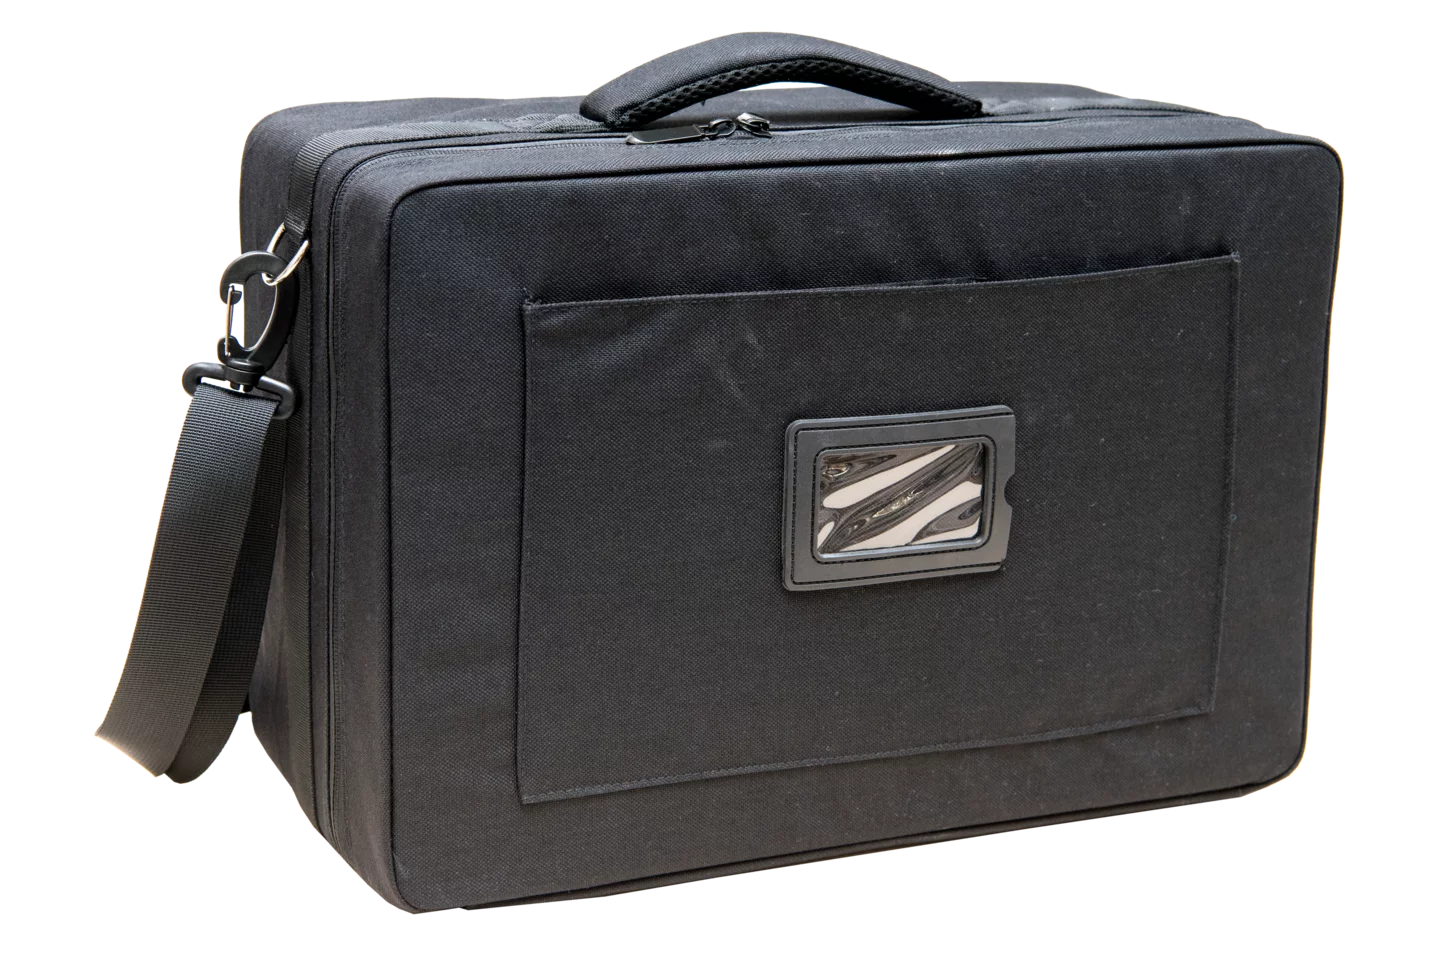 Carrying case L16 (only for KT-195 / 200 / 385)